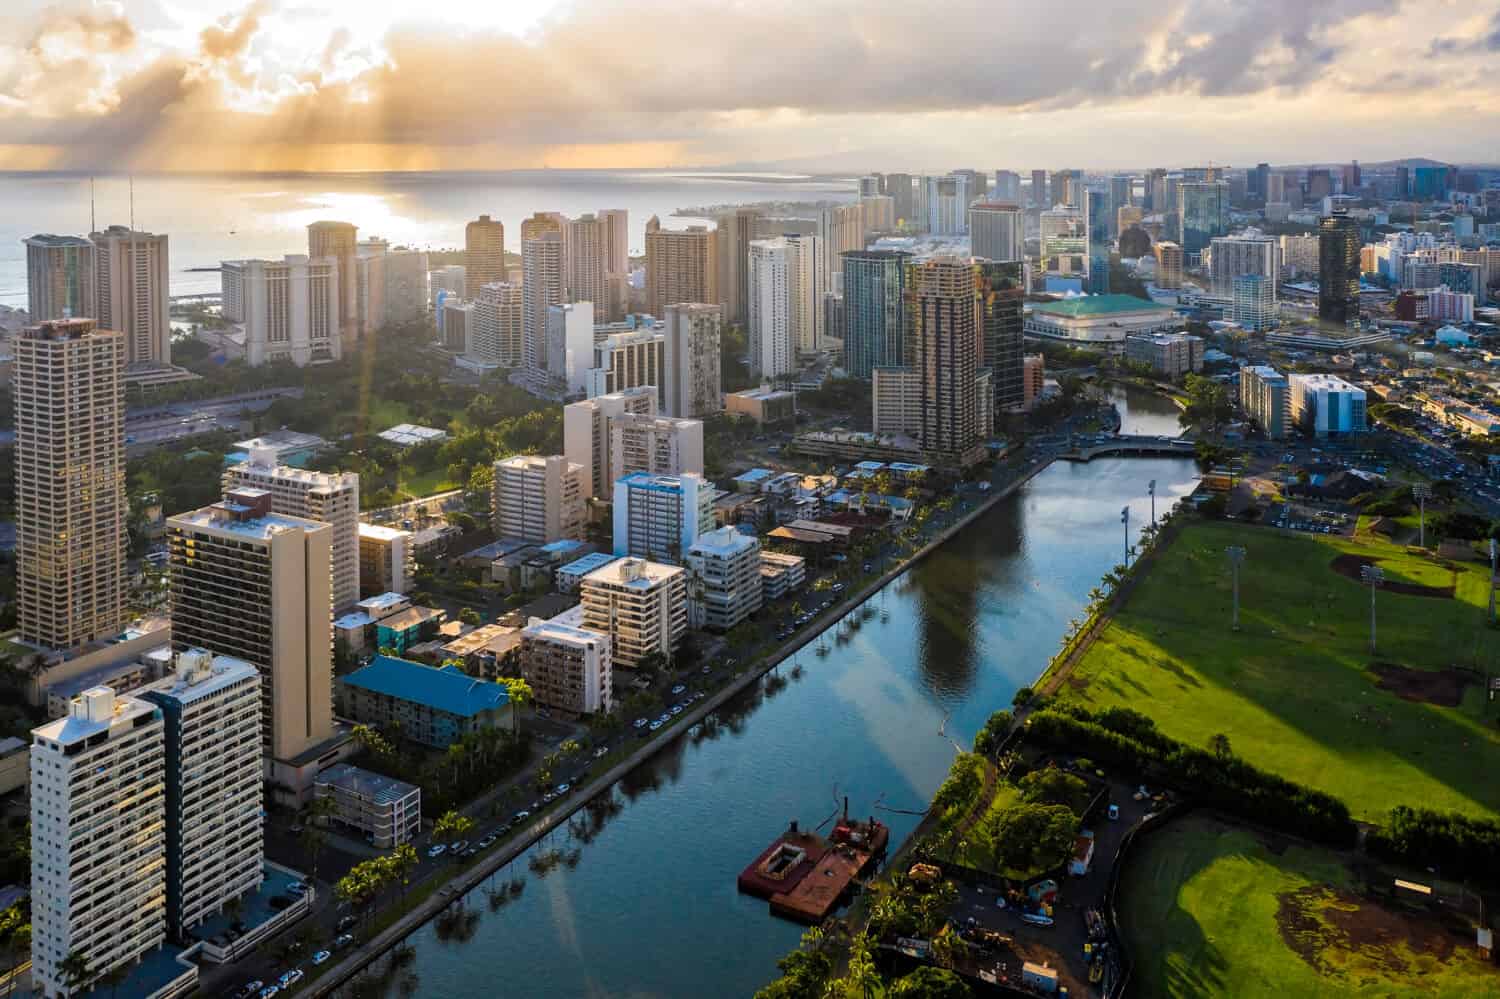 Aerial view of Waikiki district tall buildings by Wai Canal at sunset. Oahu Island, Hawaii